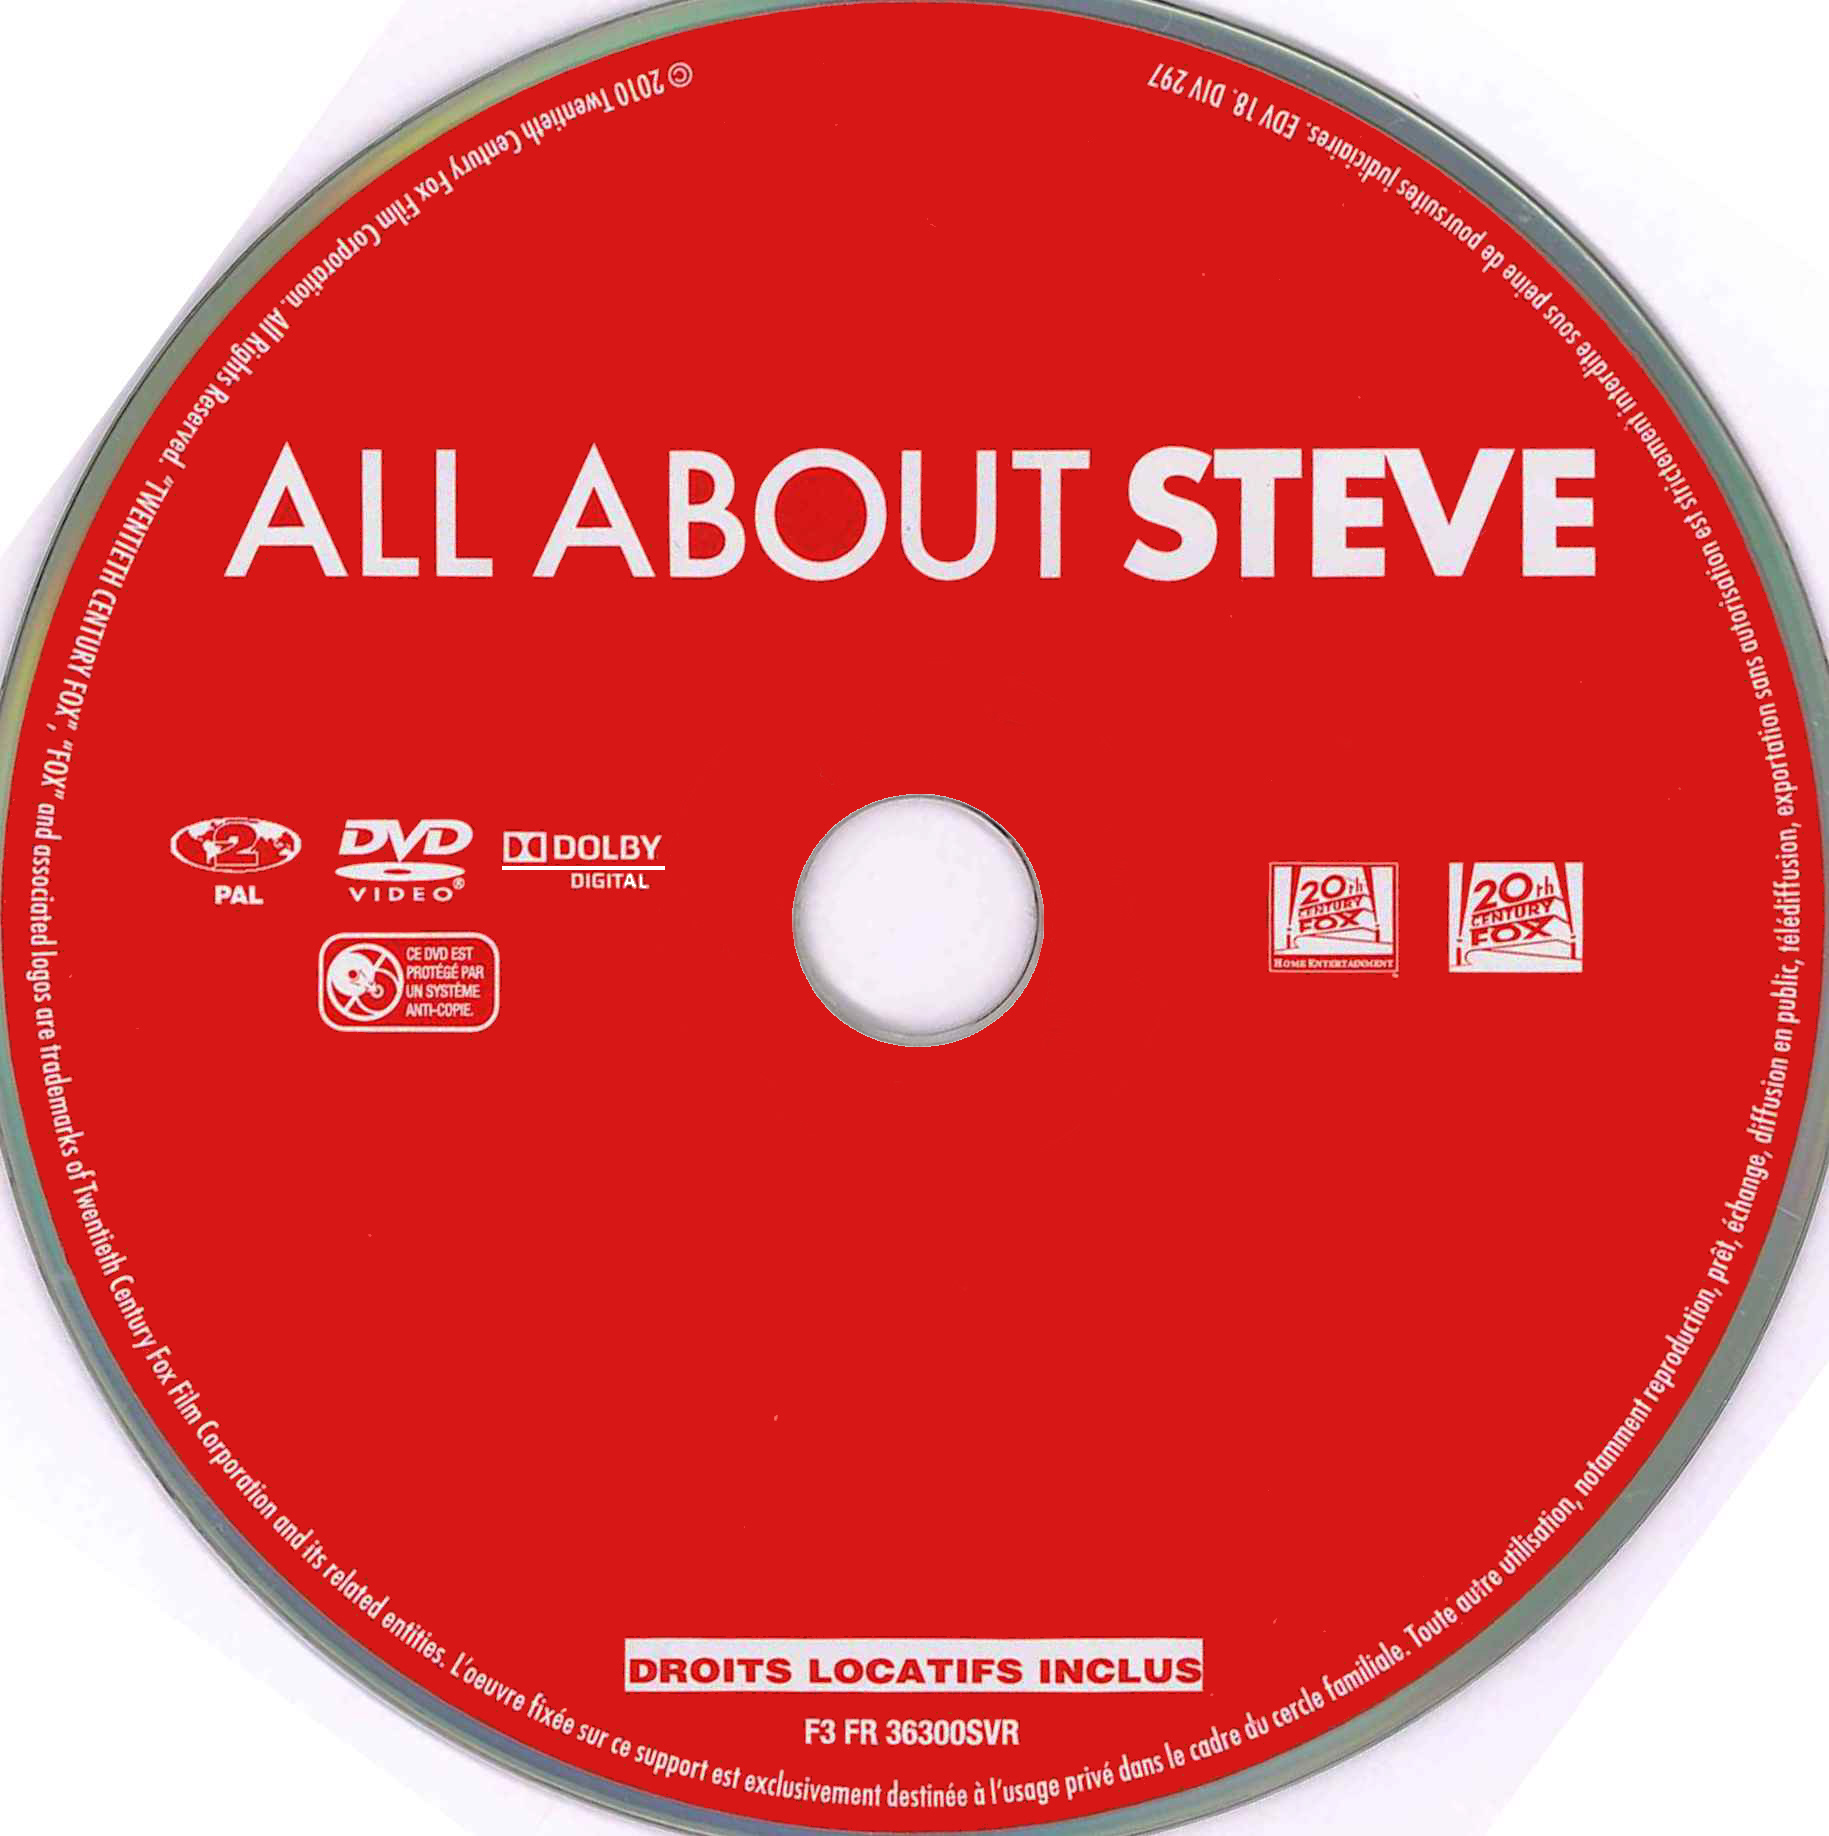 All about Steve